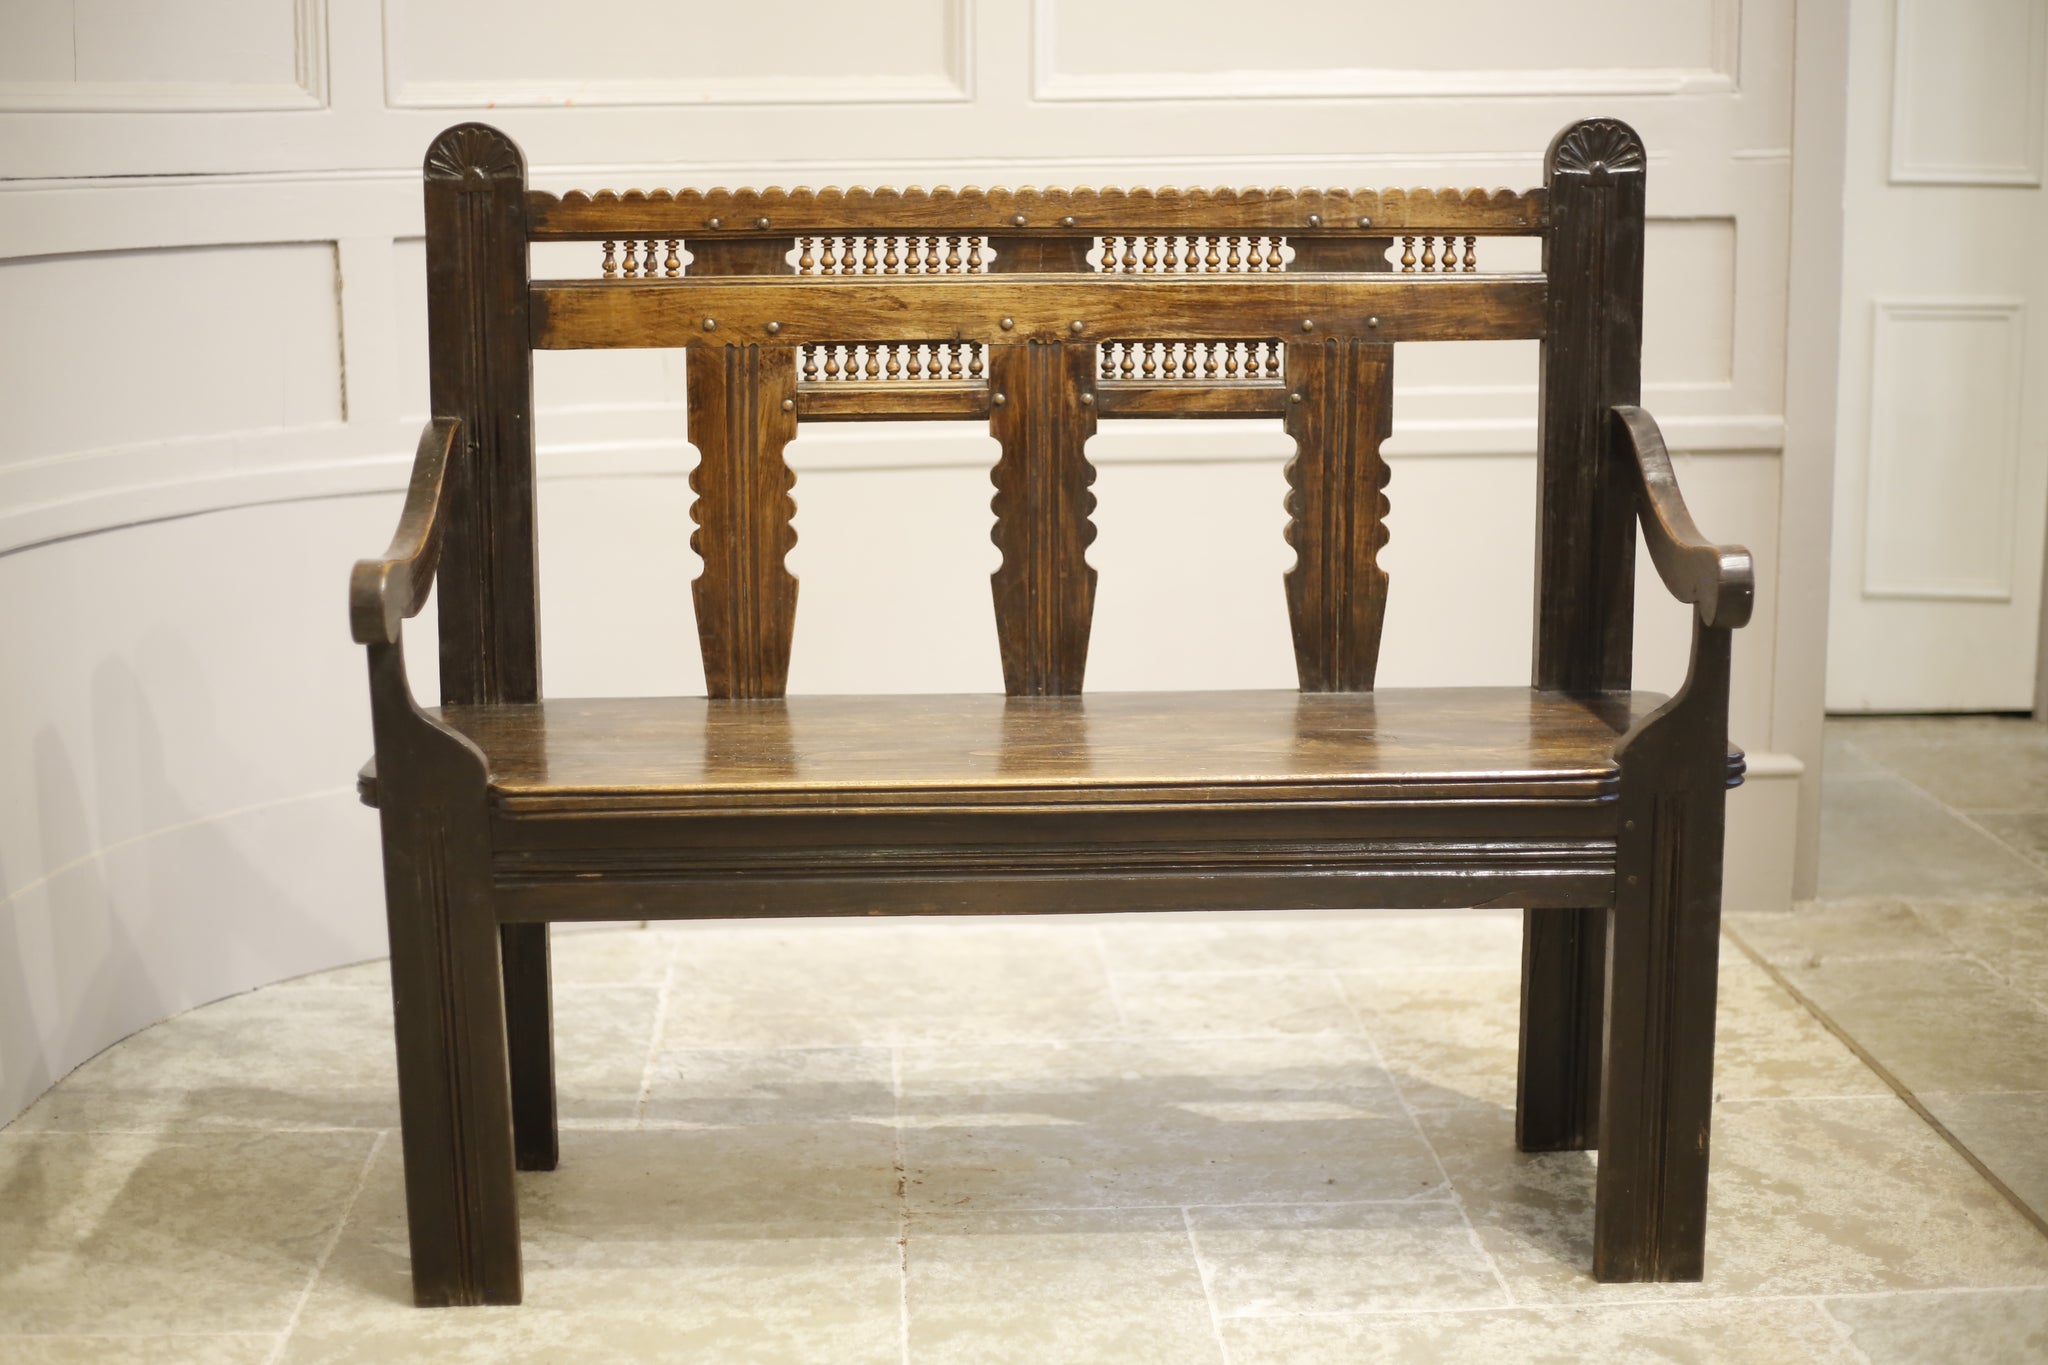 19th century French Breton country bench - TallBoy Interiors